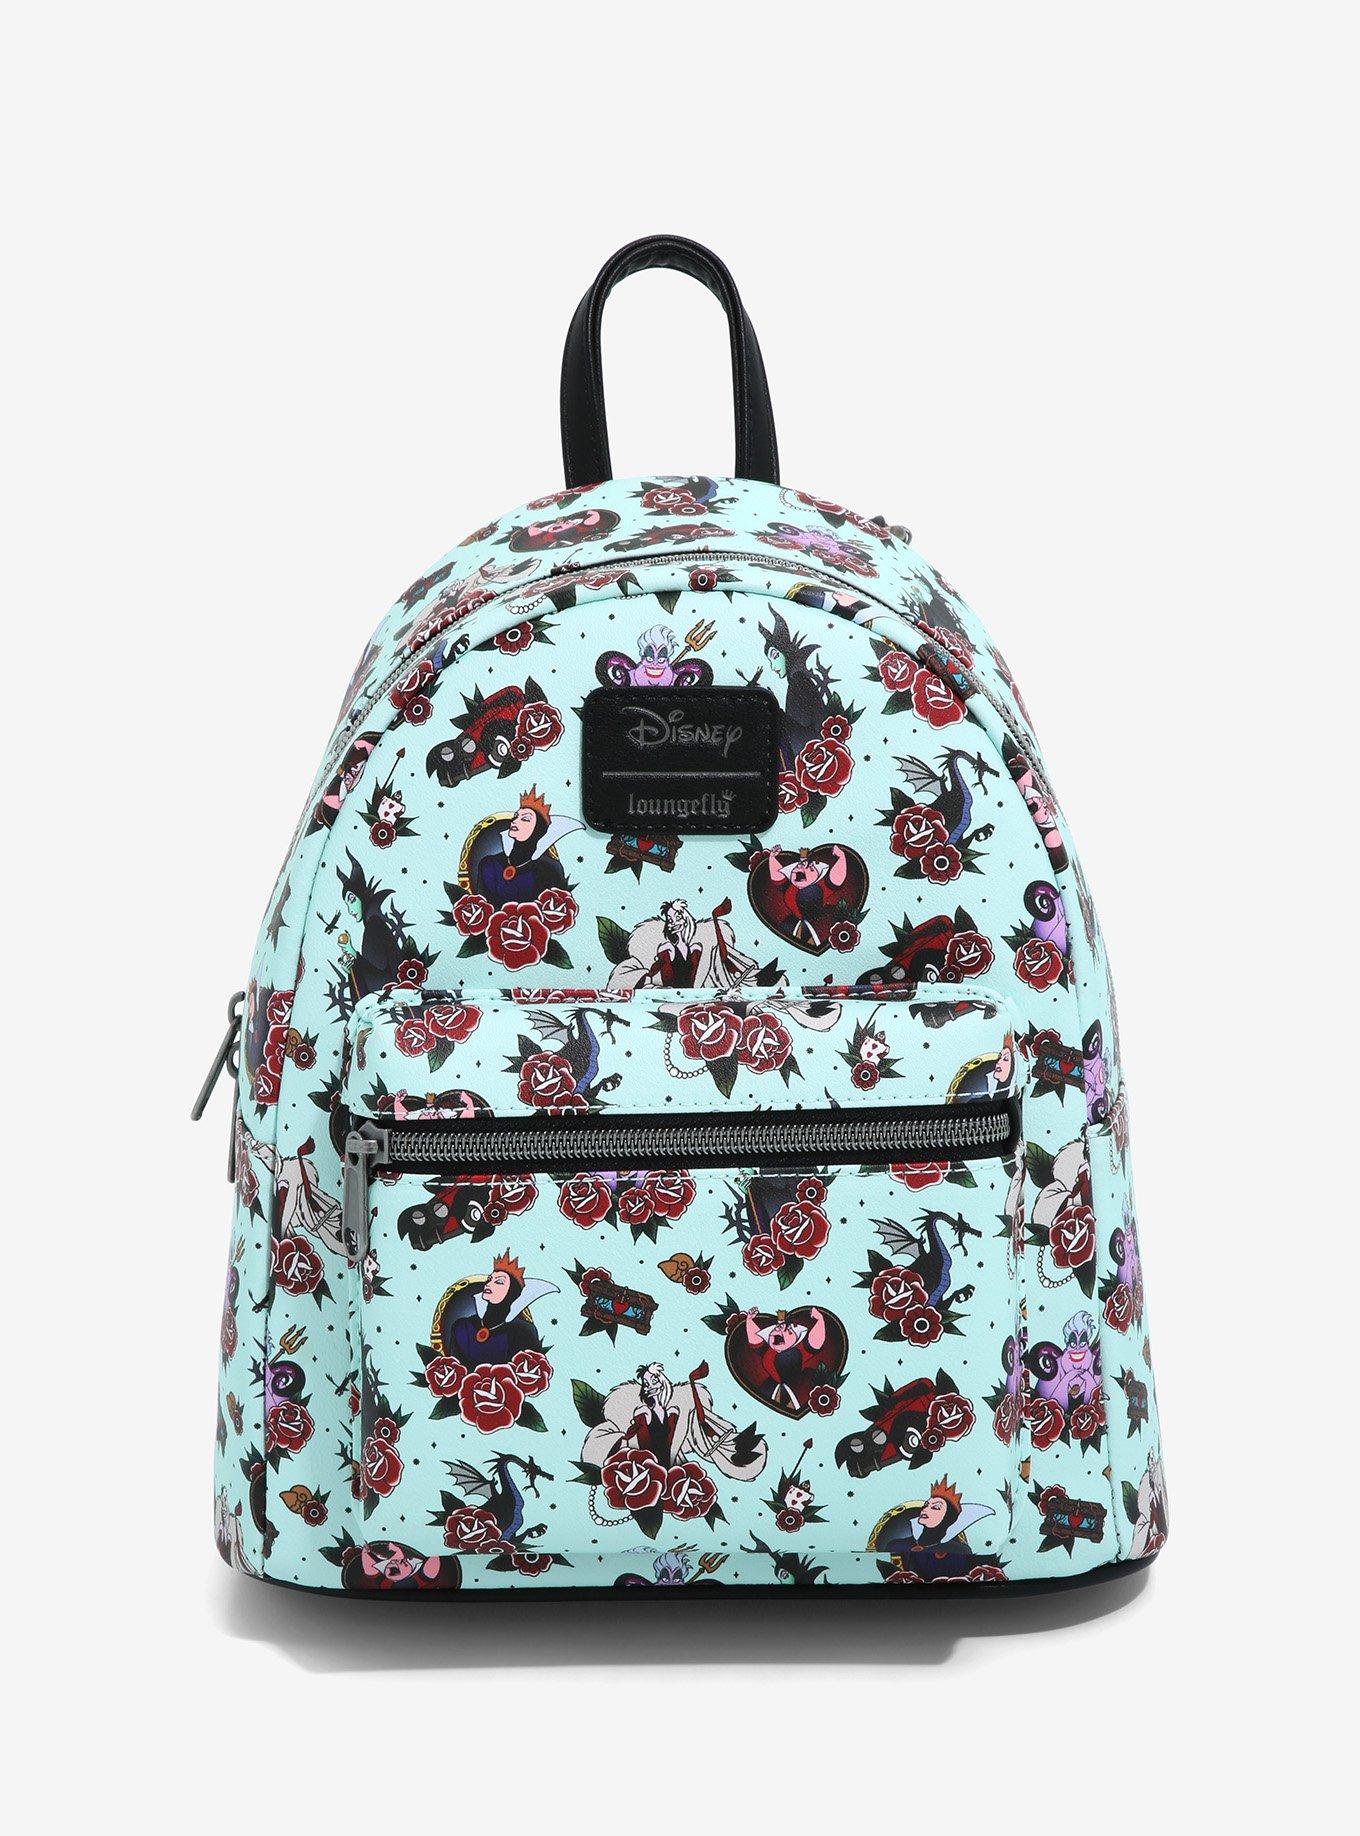 villains loungefly backpack